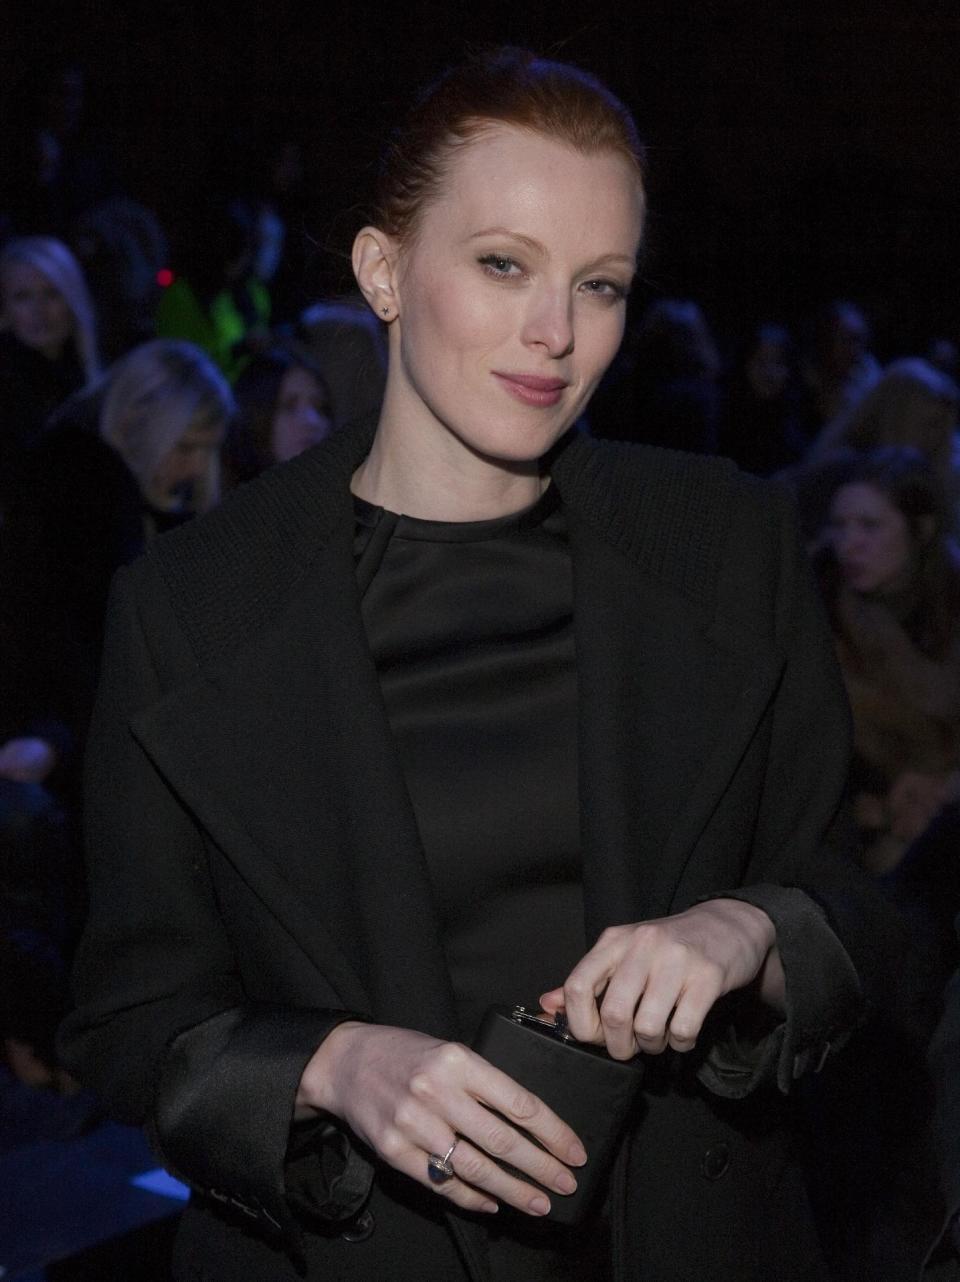 Recording artist Karen Elson attends the MBFW 2014 Fall/Winter Alexander Wang fashion show, on Saturday, Feb. 8, 2014 in New York. (Photo by Andy Kropa/Invision/AP)